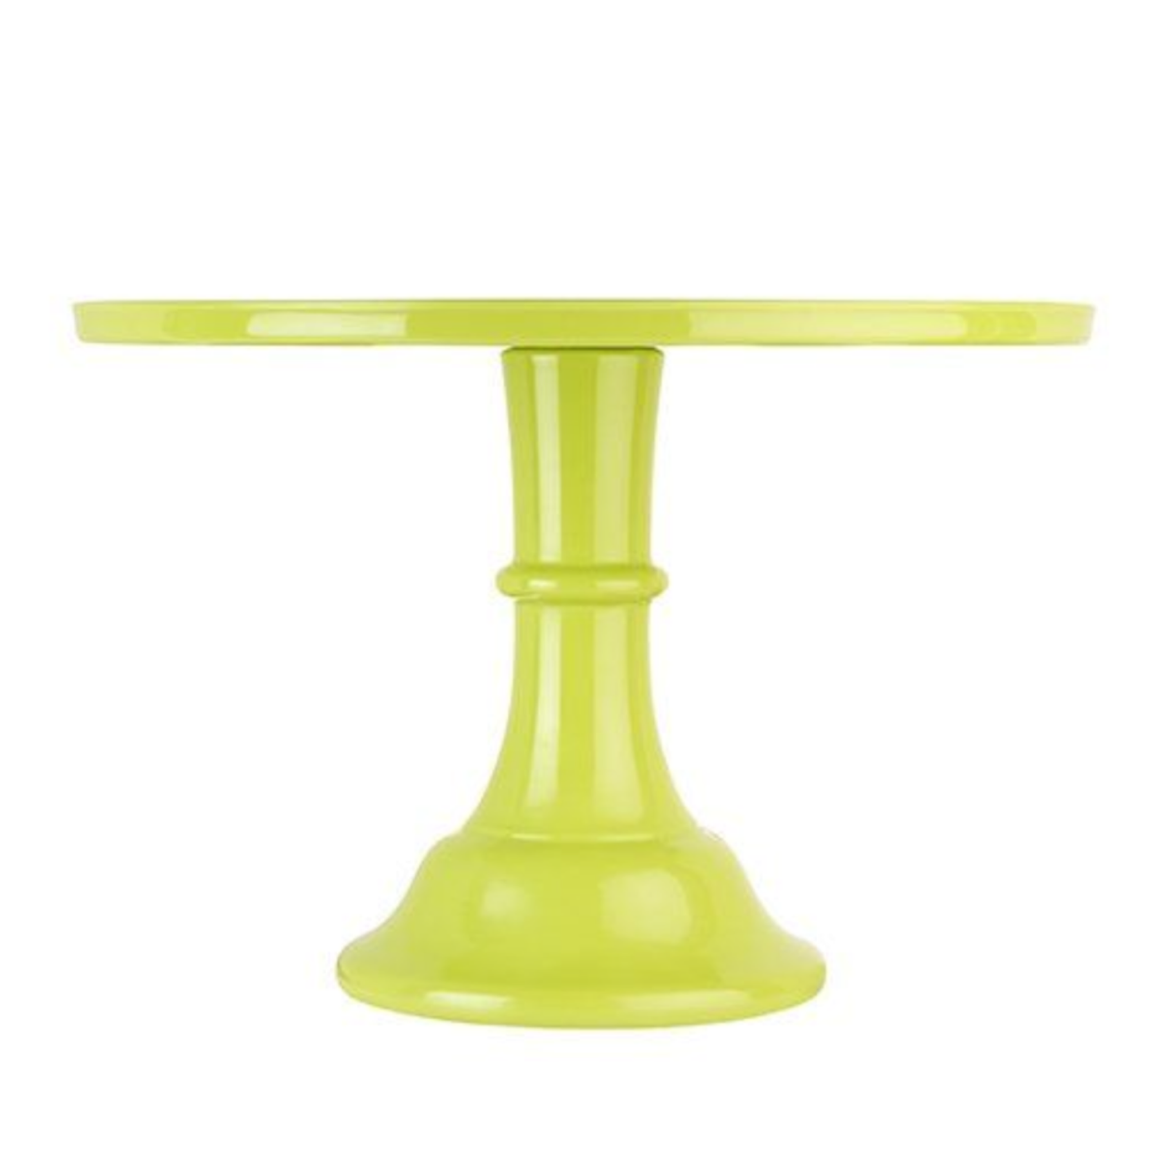 CAKE STAND - MELAMINE GREEN LIME CHARTREUSE